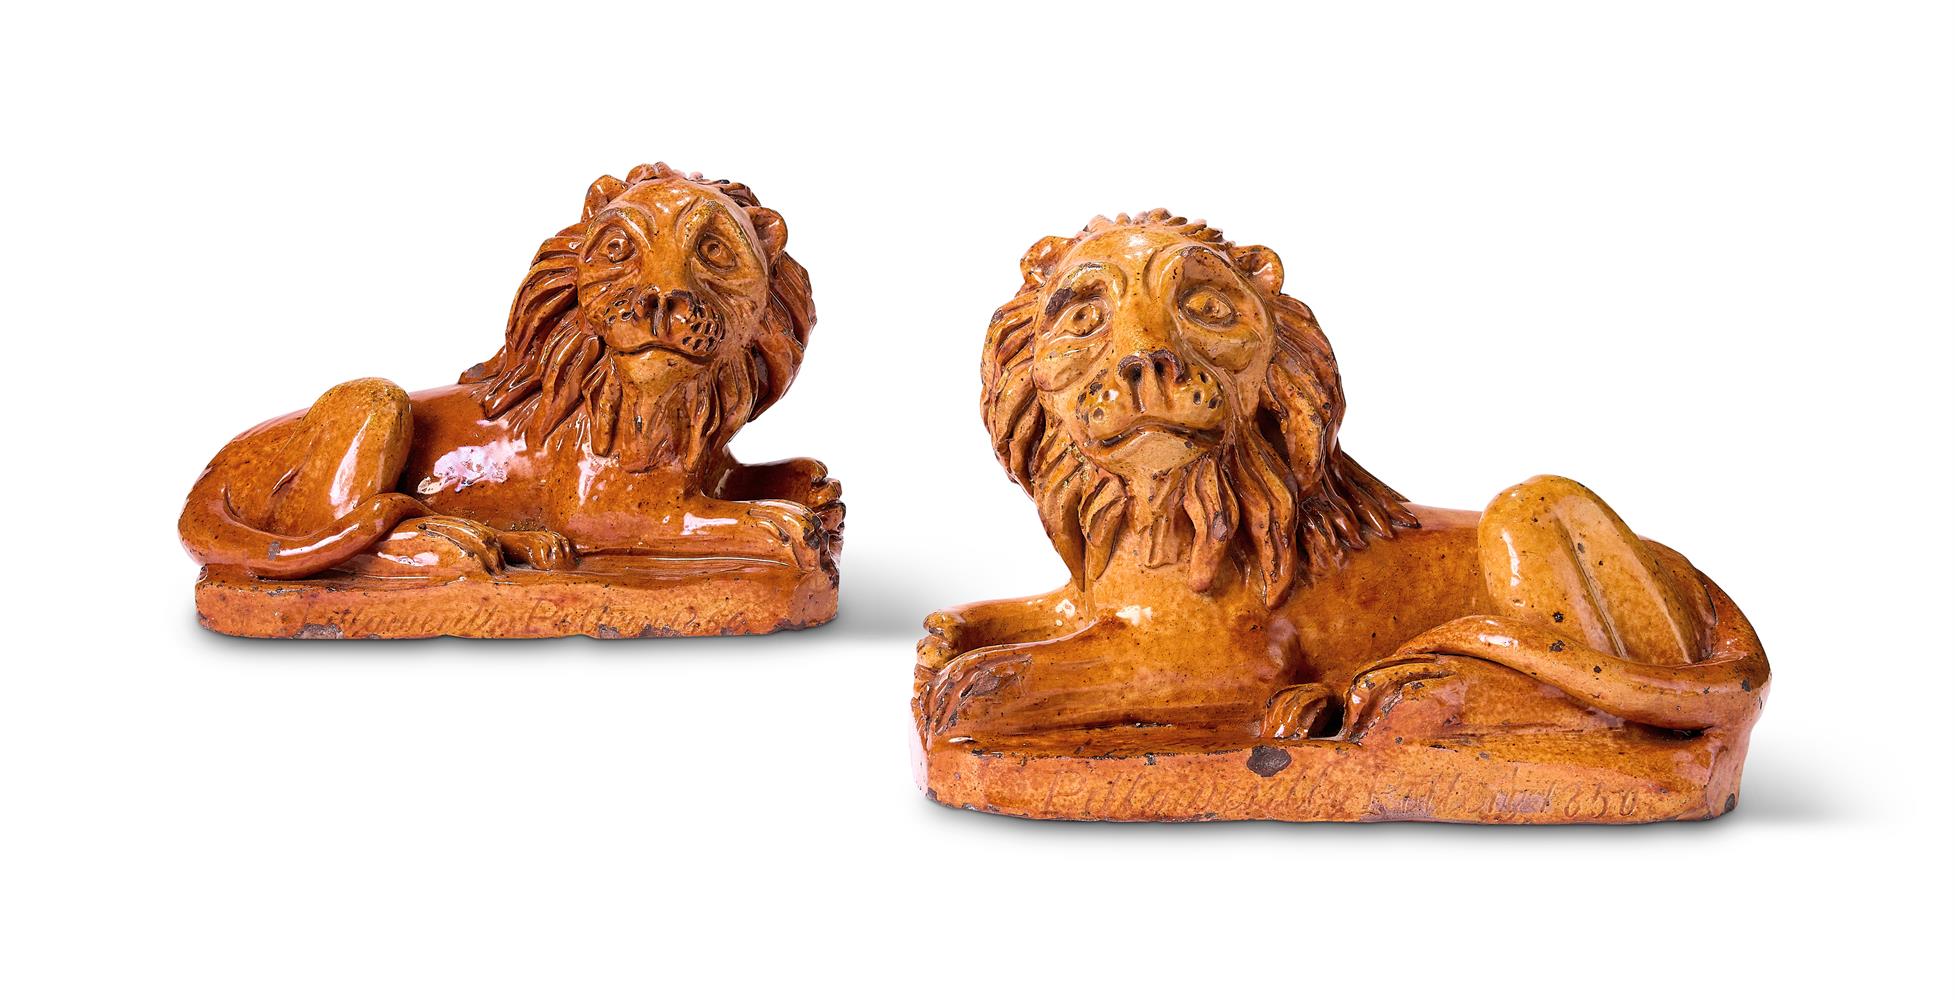 A PAIR OF PILL POTTERY (NEWPORT MONMOUTHSHIRE) TREACLE-GLAZED RED POTTERY MODELS OF RECUMBENT LIONS